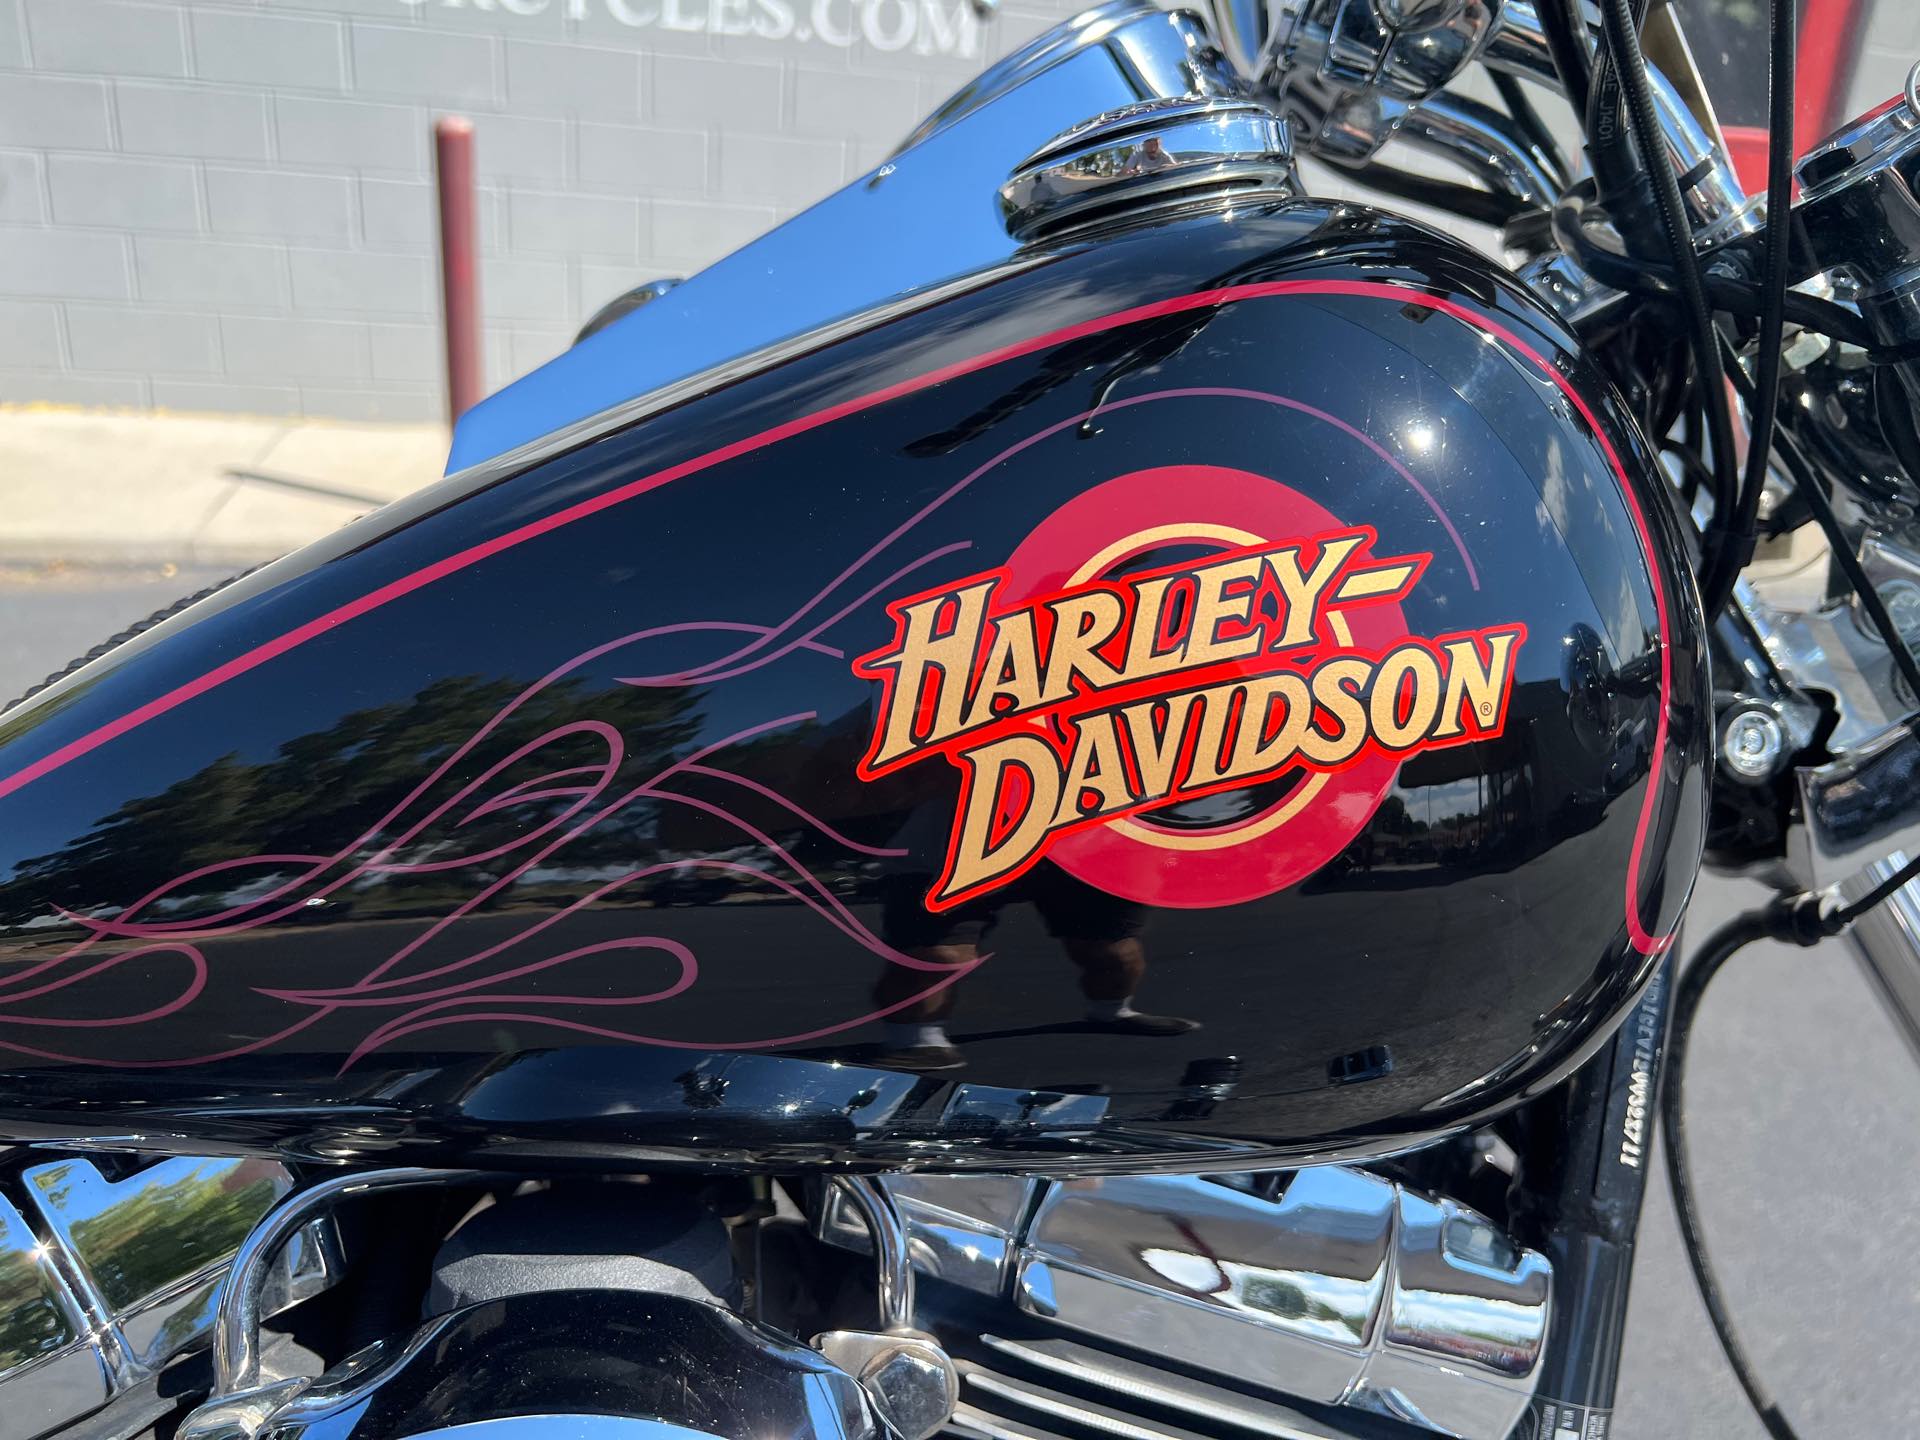 2000 Harley-Davidson FXDWG at Aces Motorcycles - Fort Collins